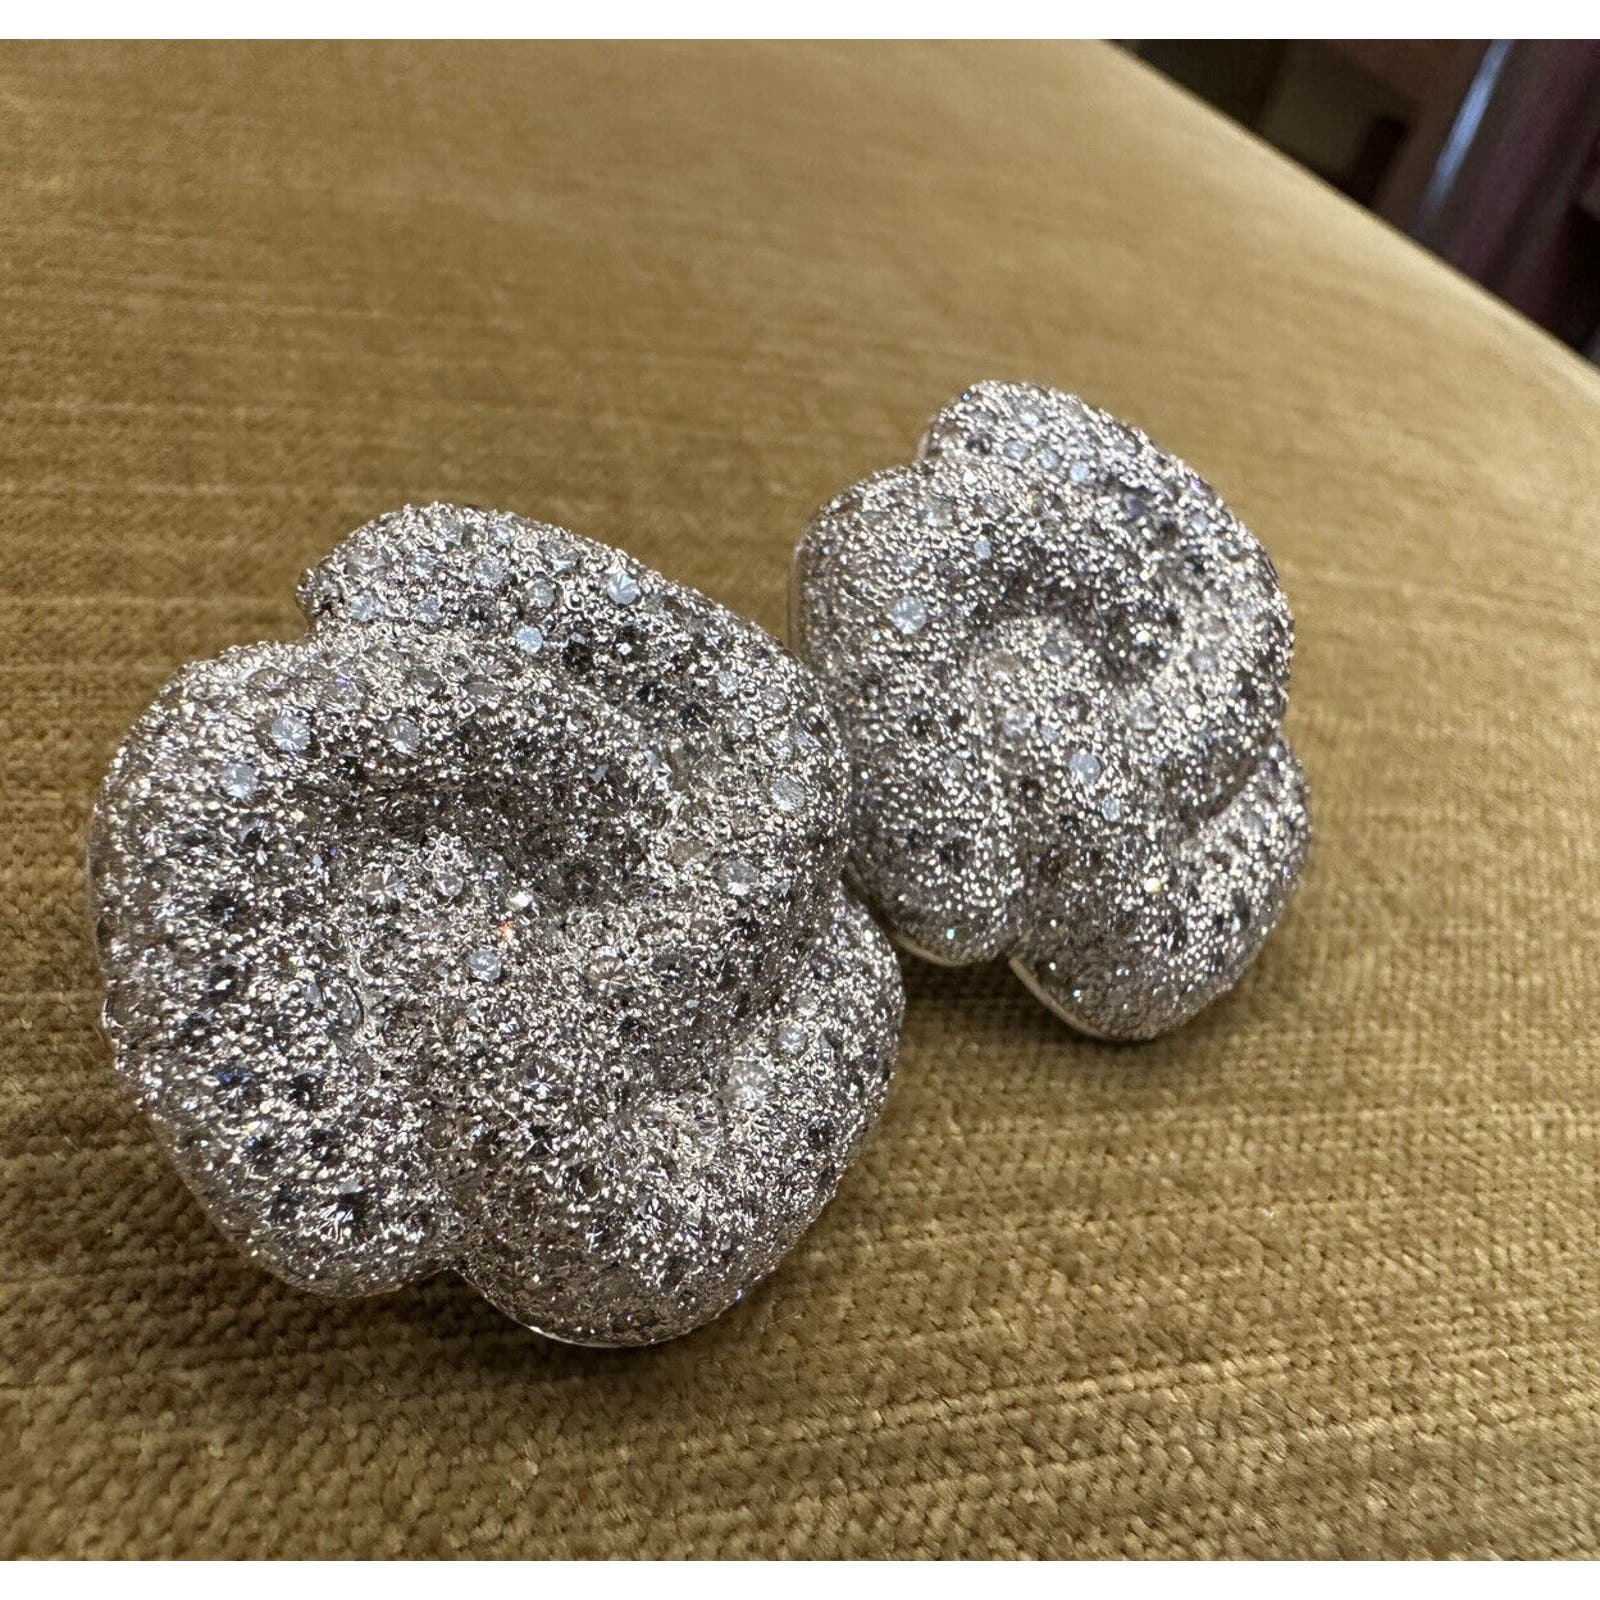 Large Pave Diamond Knot Earrings 10.00 cttw in 18k/14k Gold - HM2350ZE